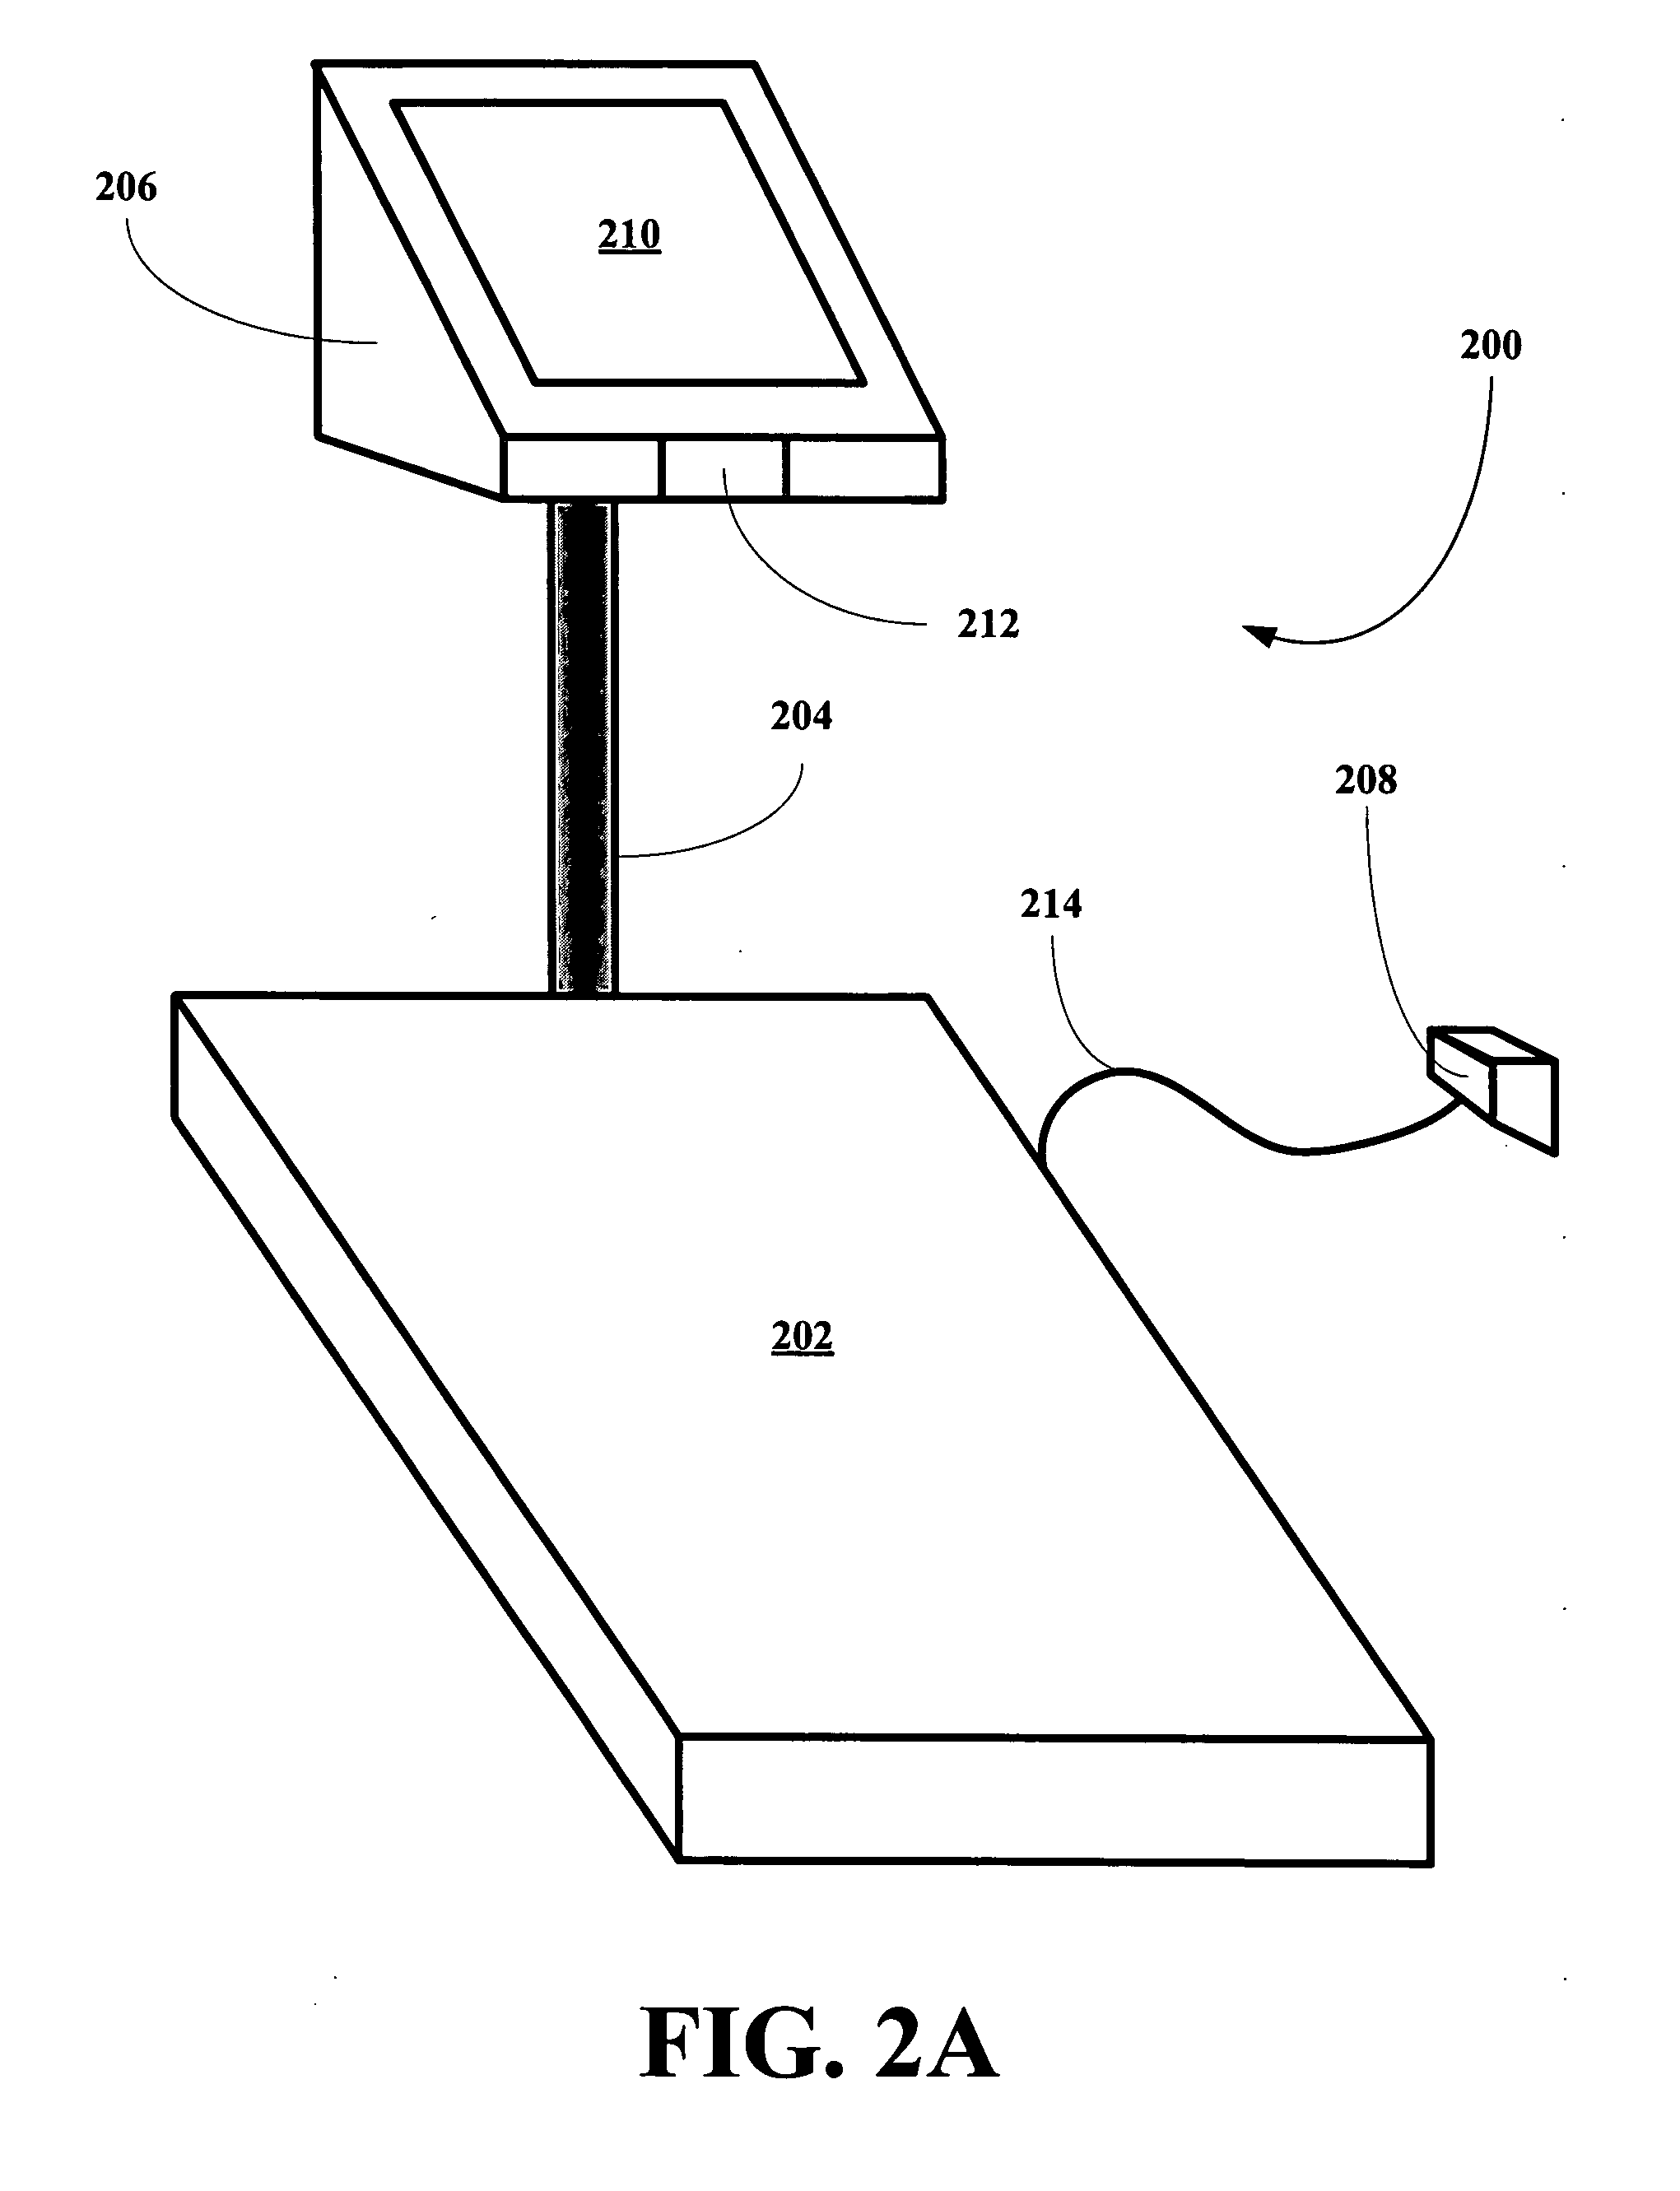 Caloric balance weight control system and methods of making and using same